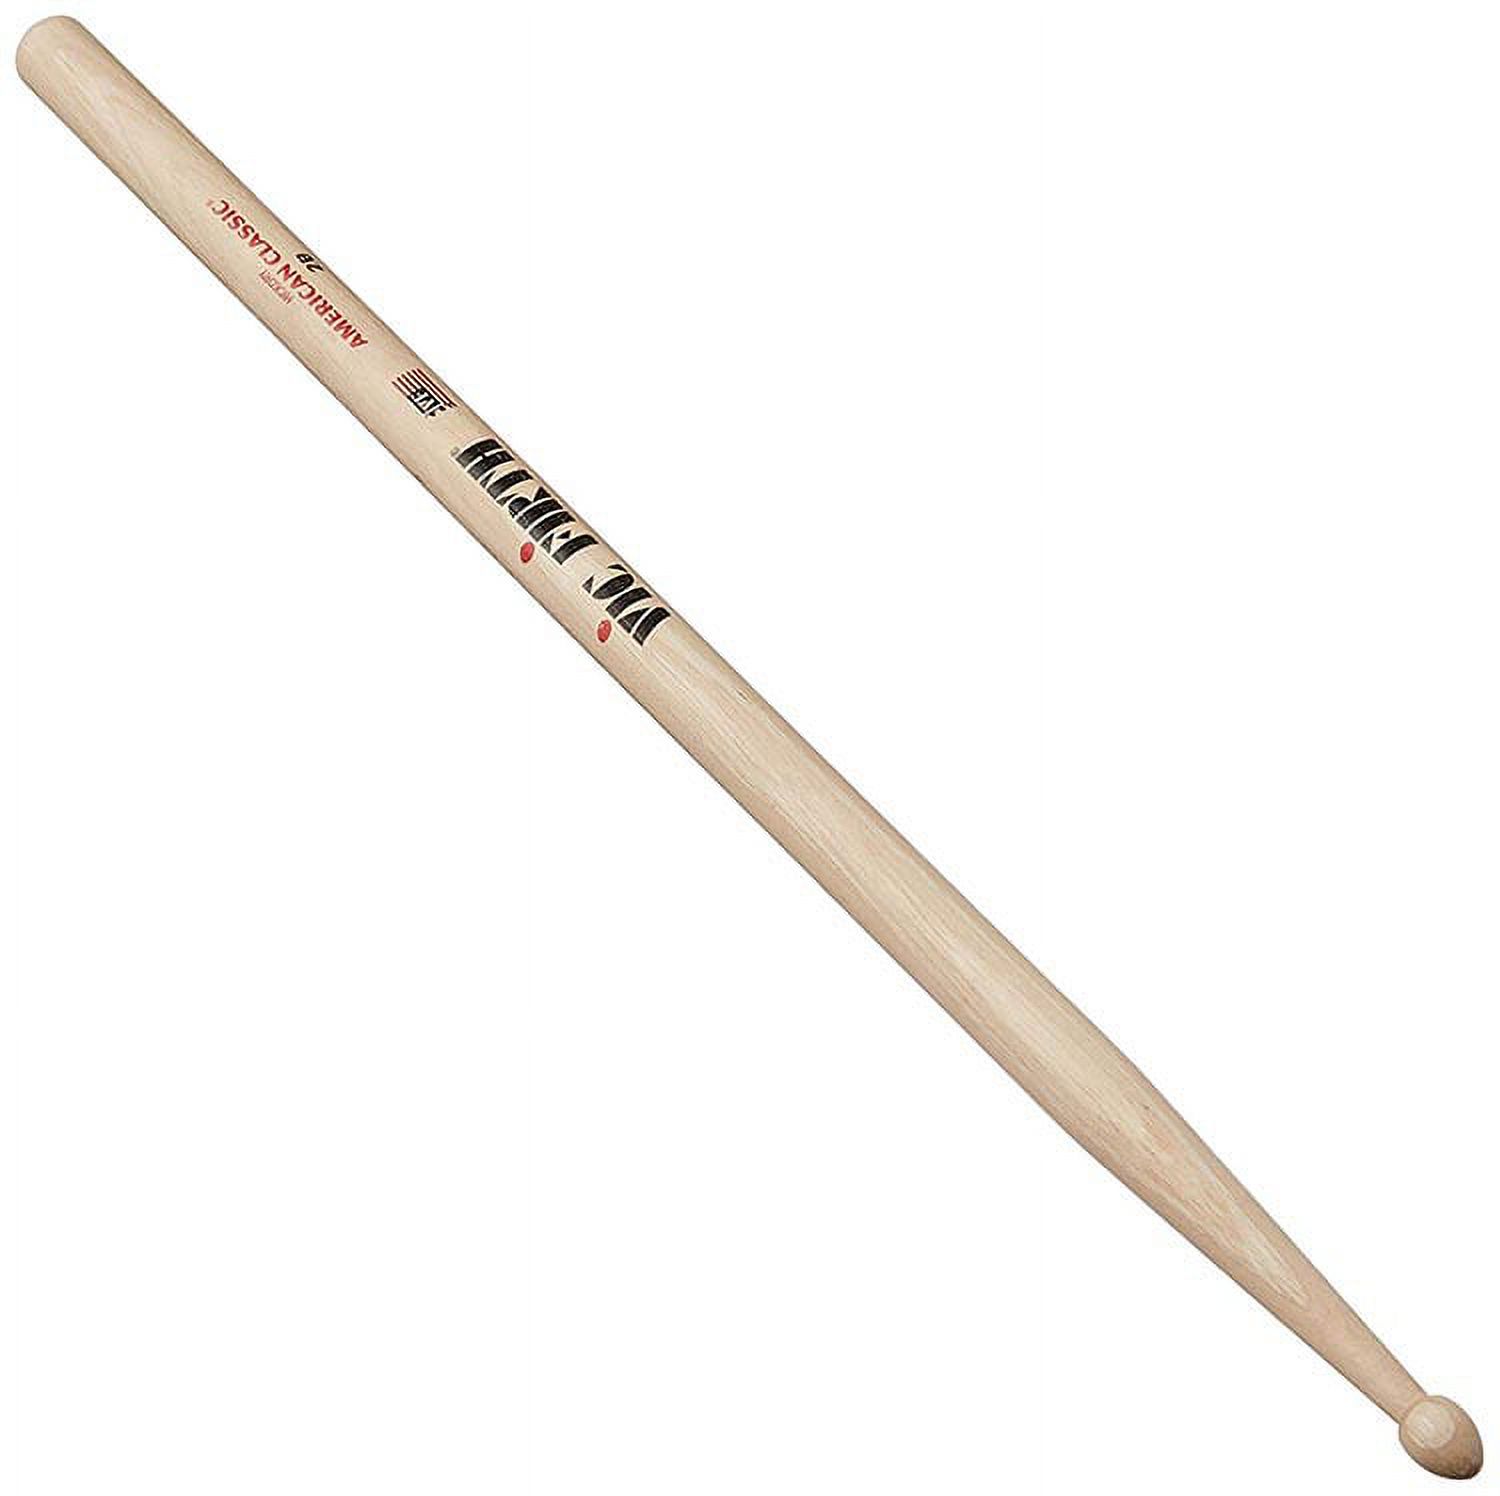 Vic Firth Corpsmaster Signature Snare Sticks Colin McNutt with Vic Firth American Classic 2B Drumsticks - image 1 of 3